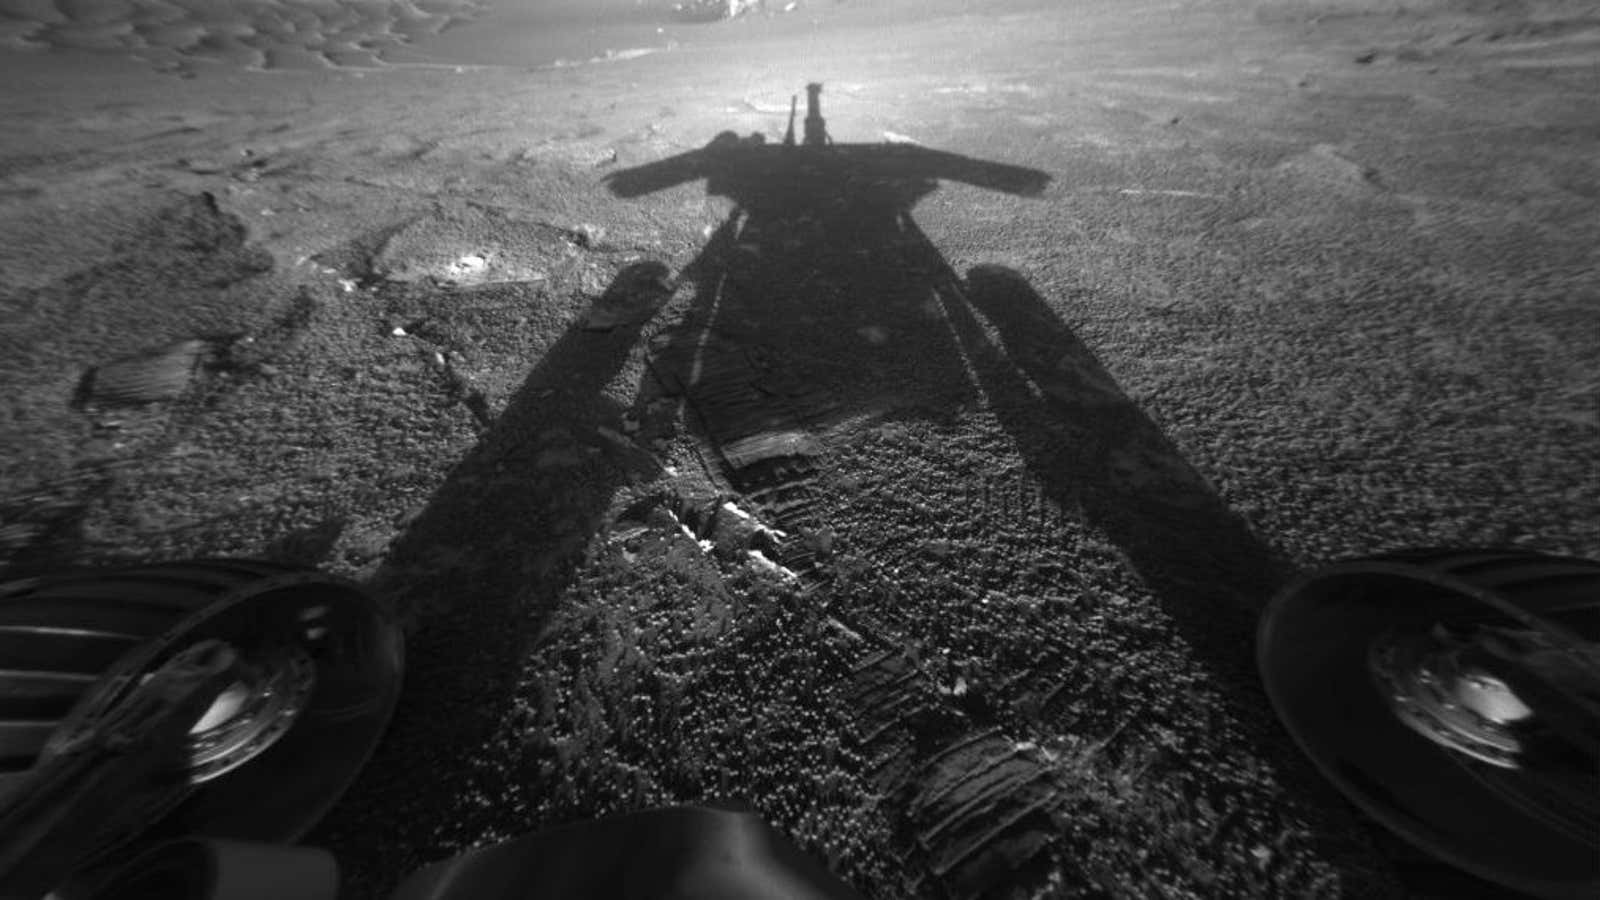 Opportunity gets a glimpse of its own shadow in 2004.